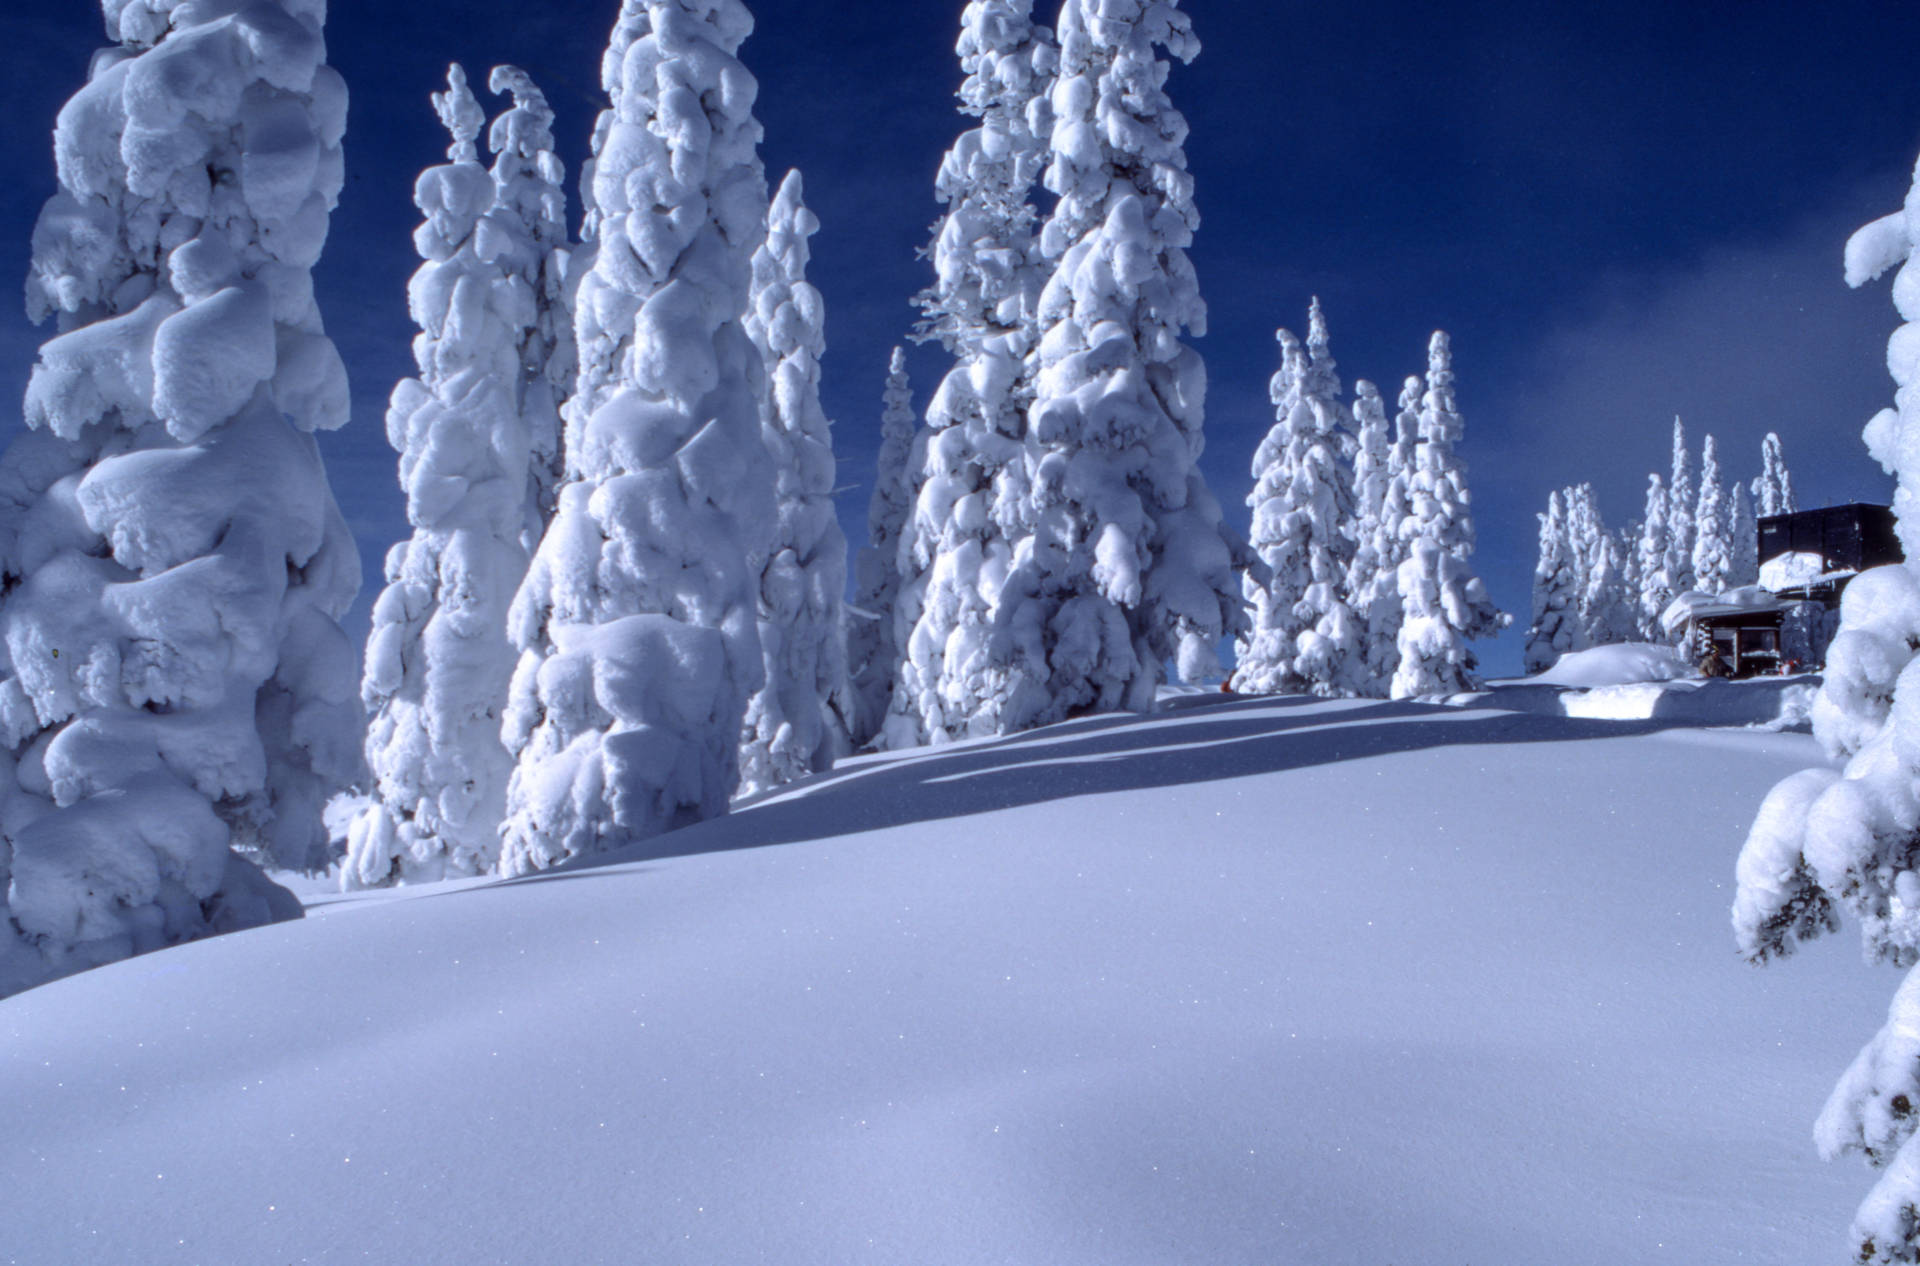 6208X4095 Snow Wallpaper and Background